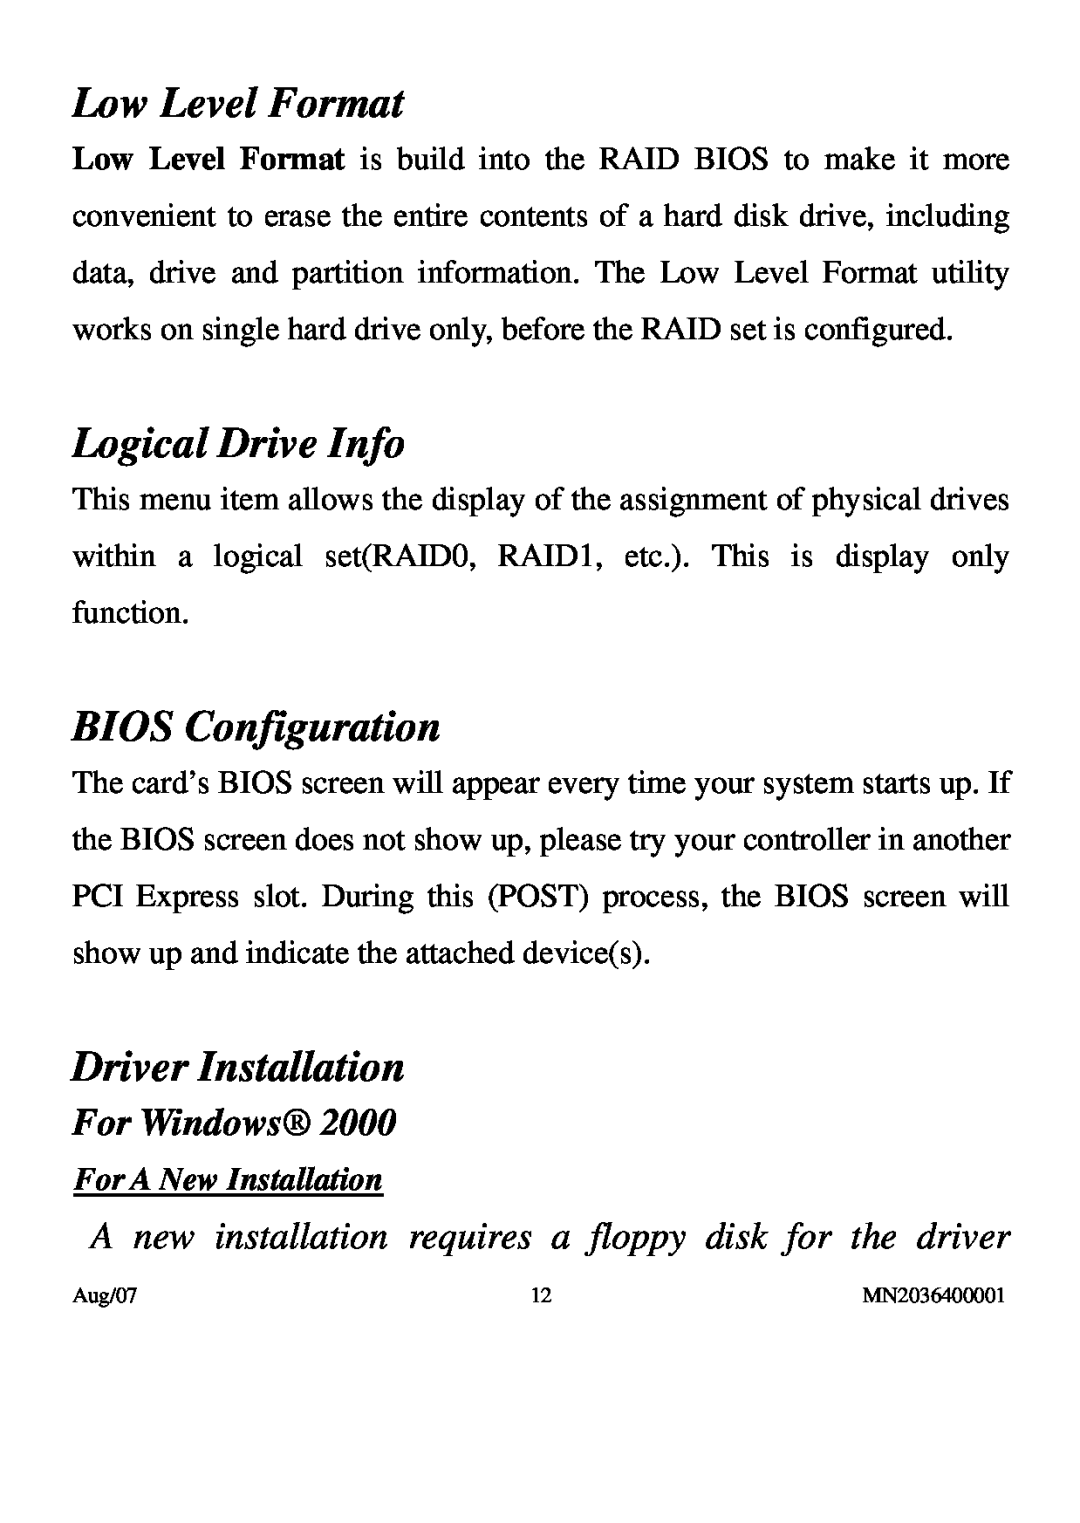 PNY P-DSA2-PCIE-RF user manual Low Level Format, Logical Drive Info, BIOS Configuration, Driver Installation, For Windows 